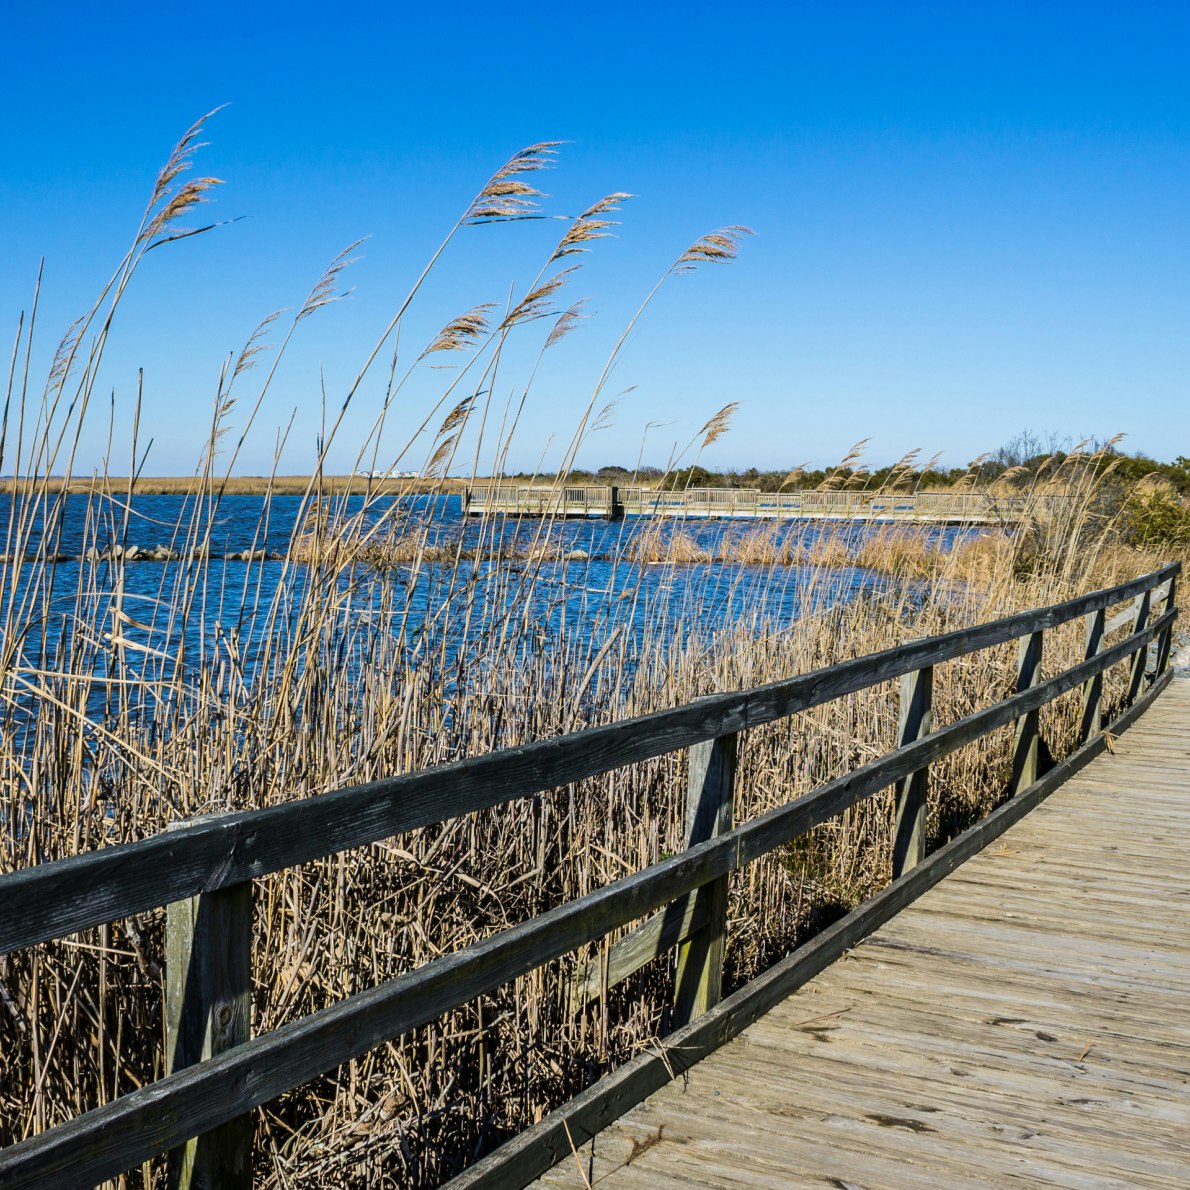 Raised walkway through marsh at Back Bay National Wildlife Refuge in Virginia Beach, Virginia.  ; Shutterstock ID 511038628; Your name (First / Last): Trisha Ping; GL account no.: 65050; Netsuite department name: Online Editorial; Full Product or Project name including edition: Trisha Ping/65050/Online Editorial/Virginia